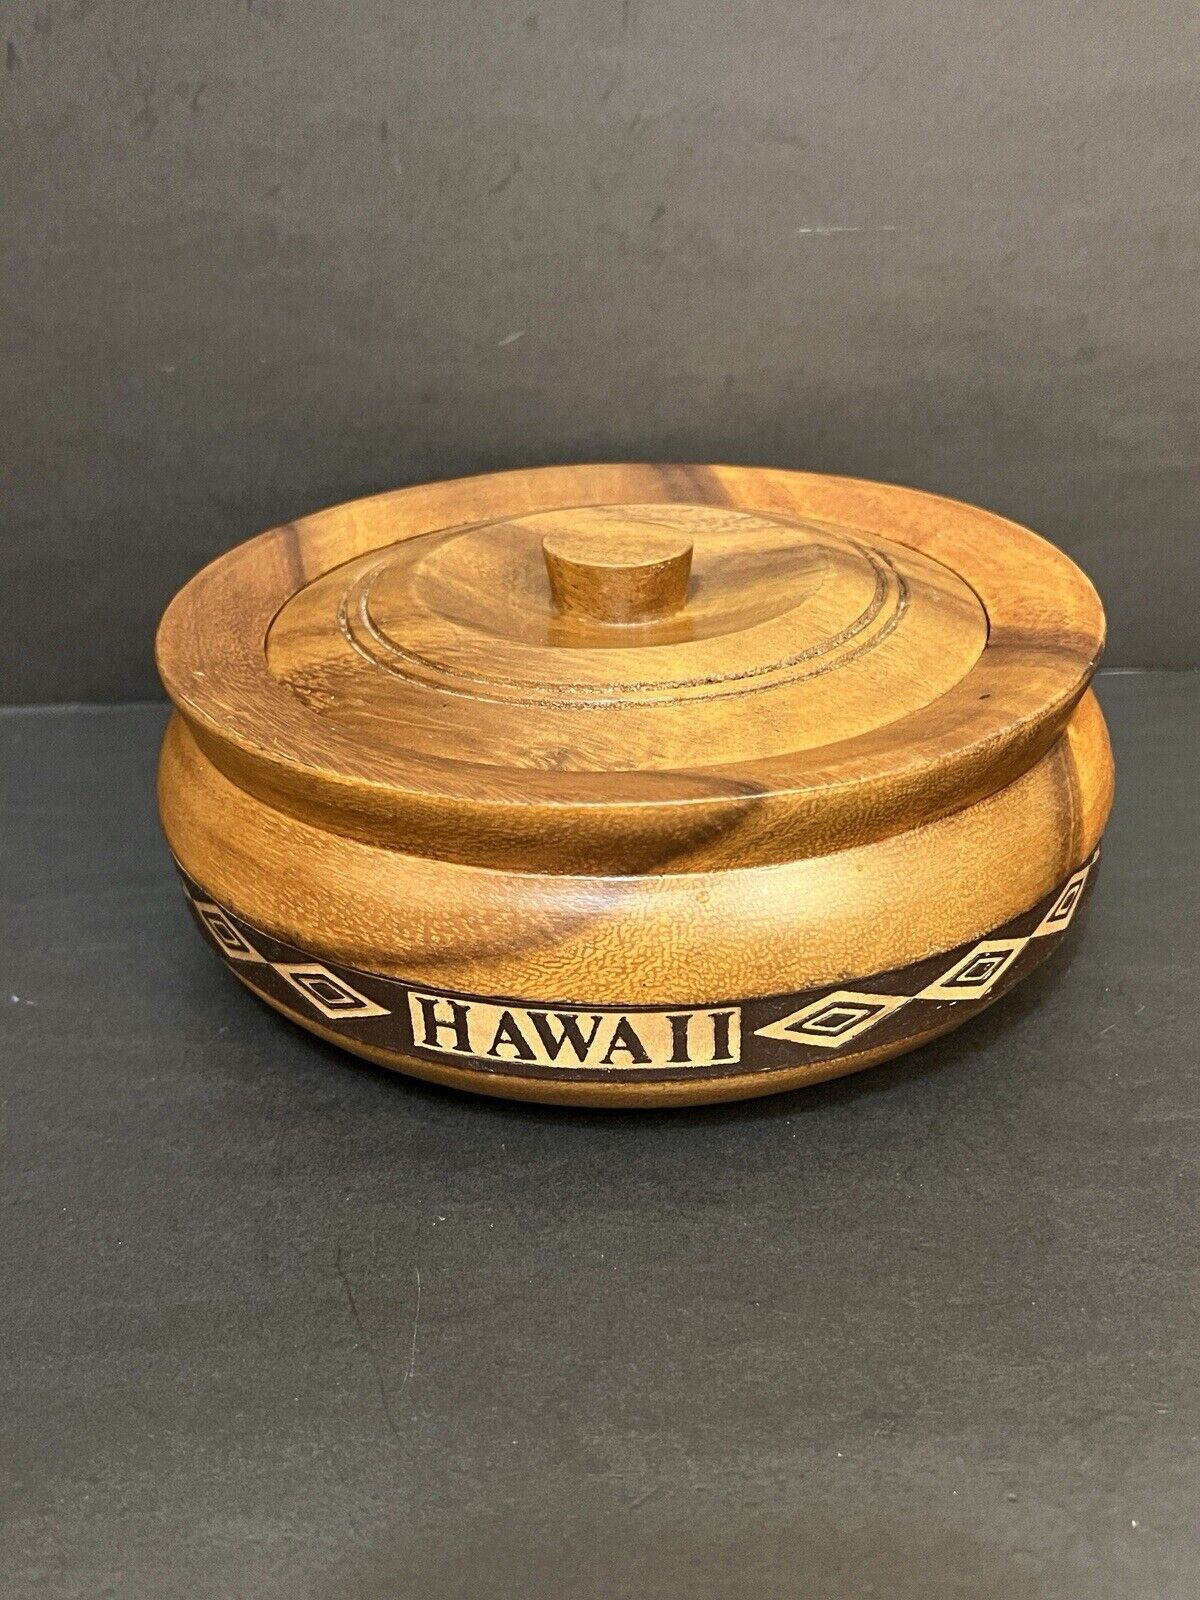 Vintage Hand Carved Round Wooden Lidded Trinket Box Container From Hawaii